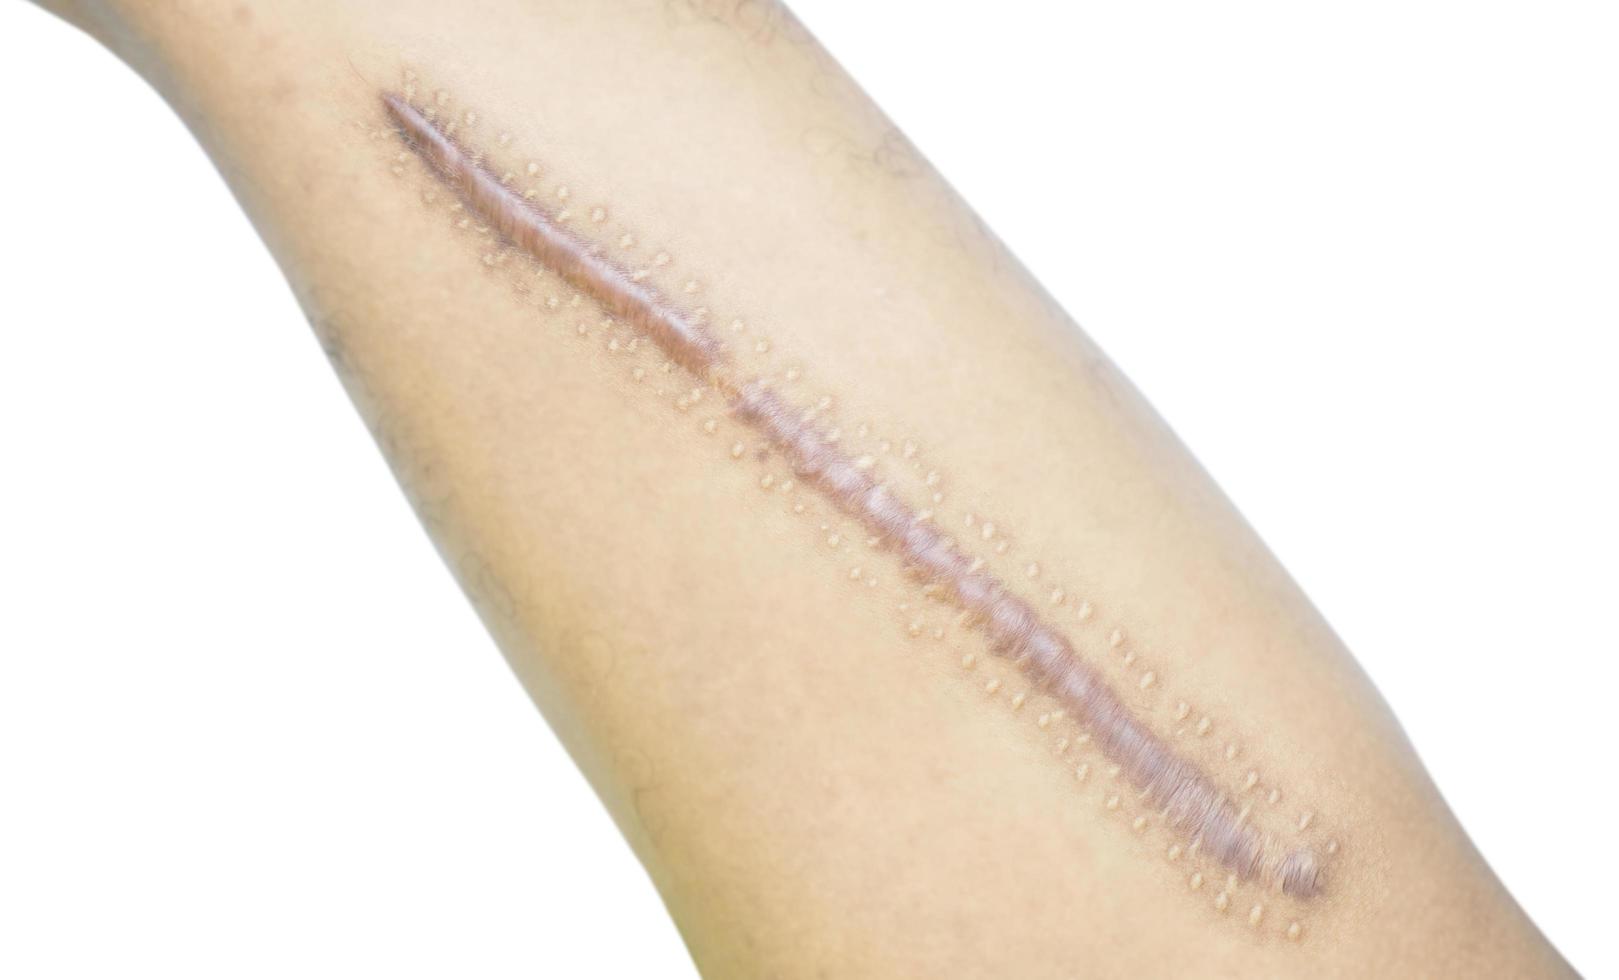 Keloid scar on leg skin. Hypertrophic scar need treatment by laser and surgery for removal scar at skincare cosmetology clinic. Scar from heal tissue injury from body accident. Dermatology technology. photo